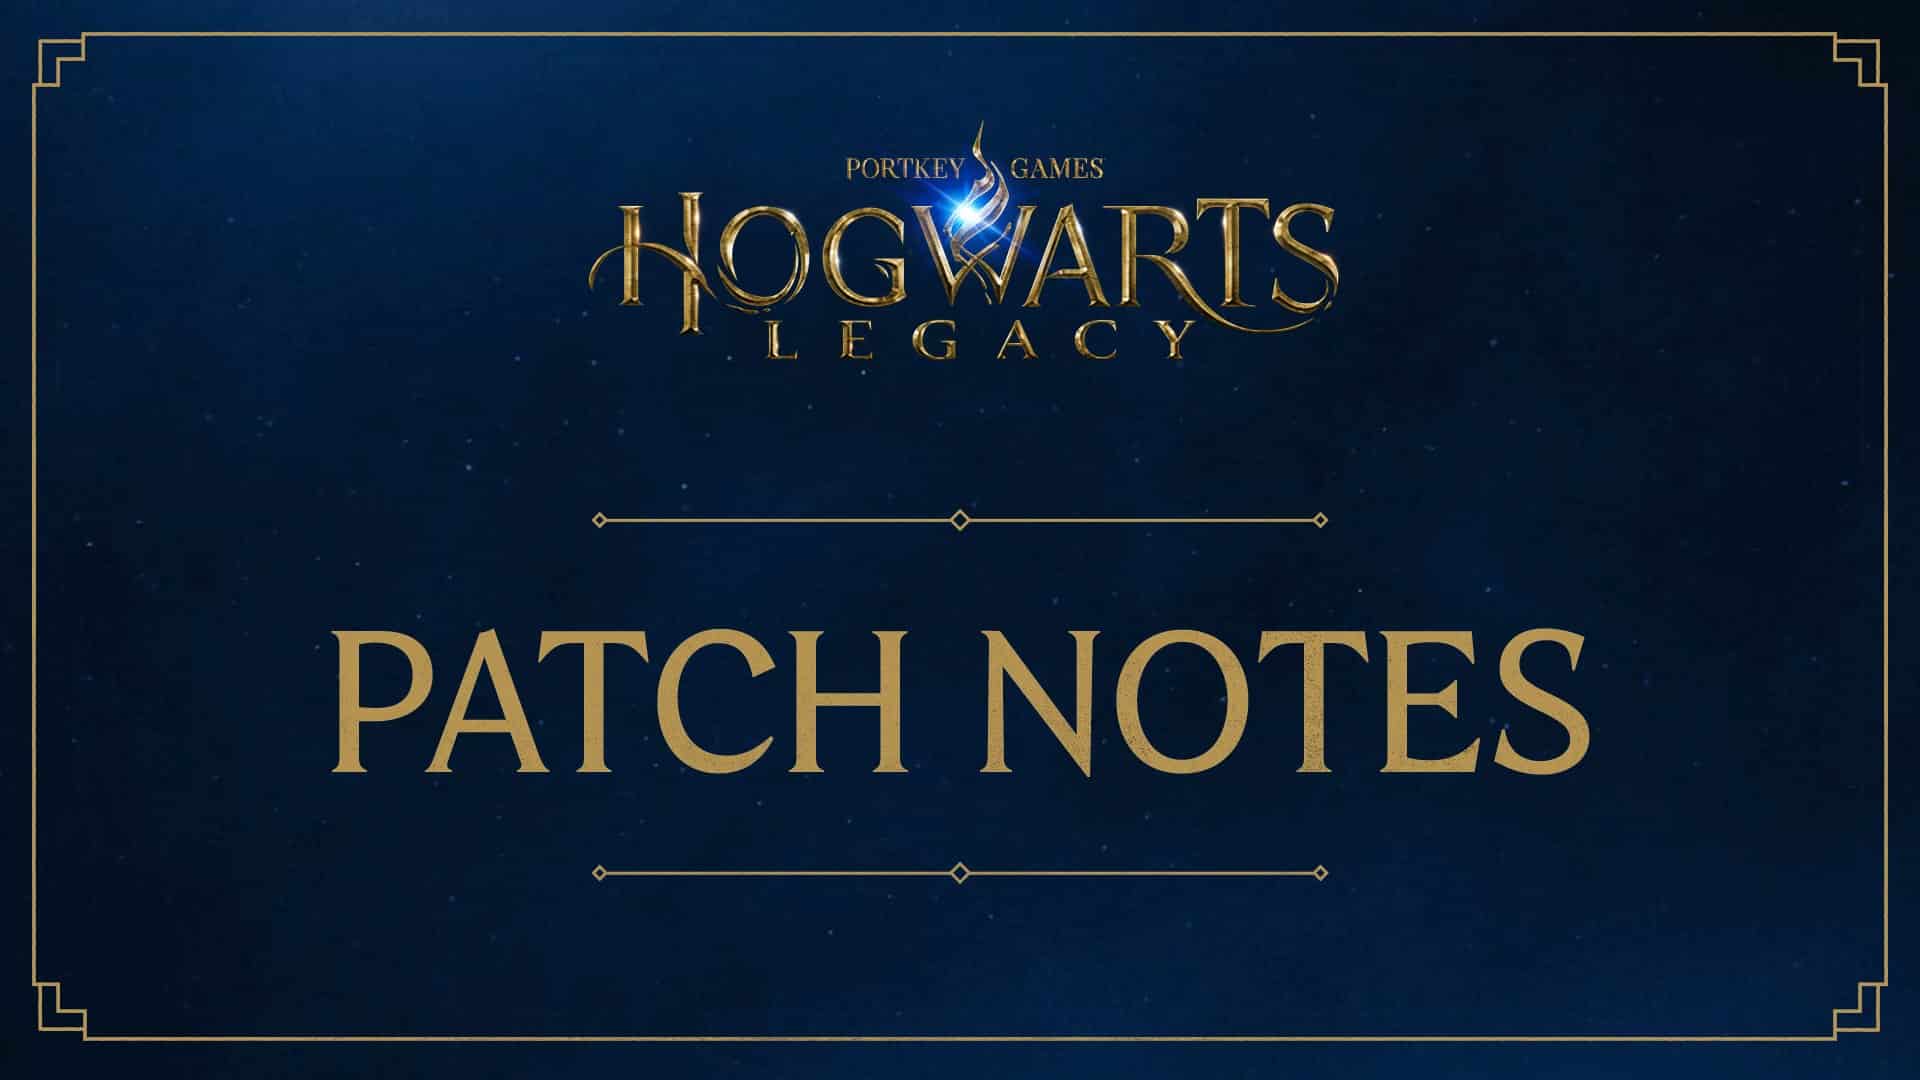 Hogwarts Legacy March 8th Patch Notes released